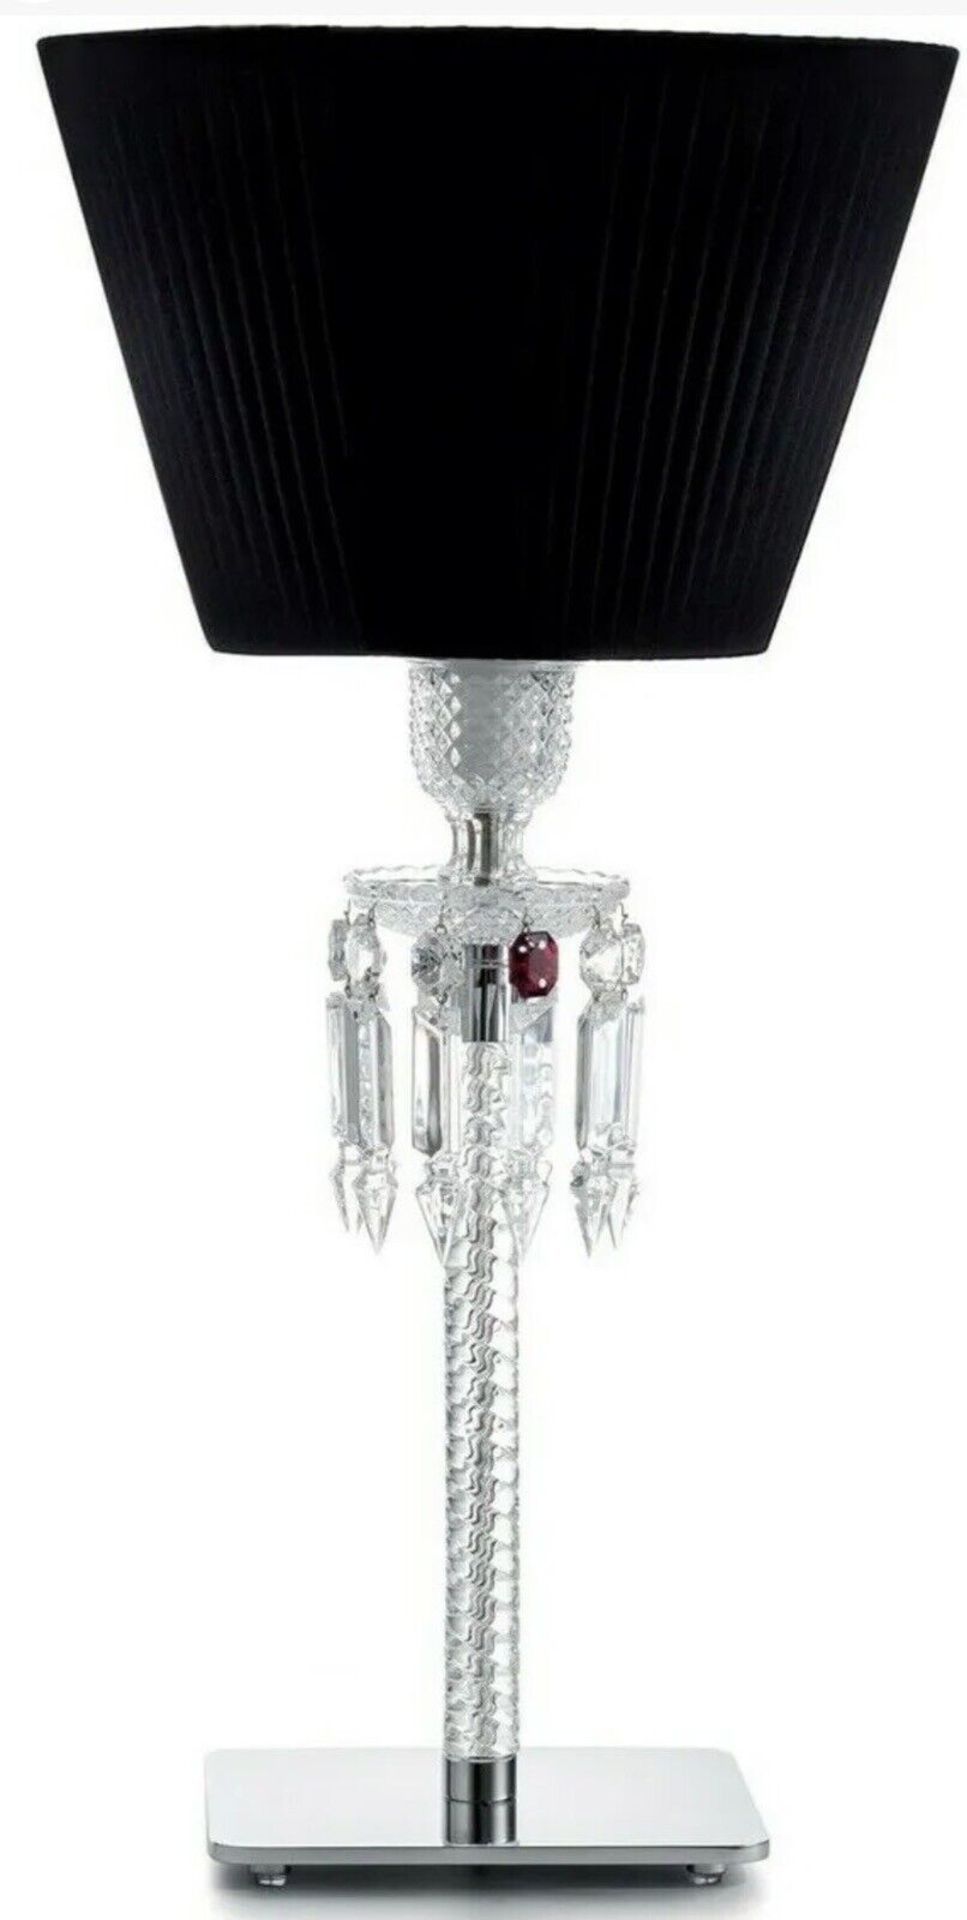 Baccarat Torch Crystal Table Lamp & Black Lampshade Arik Levy REF: 2603386 *NEW*